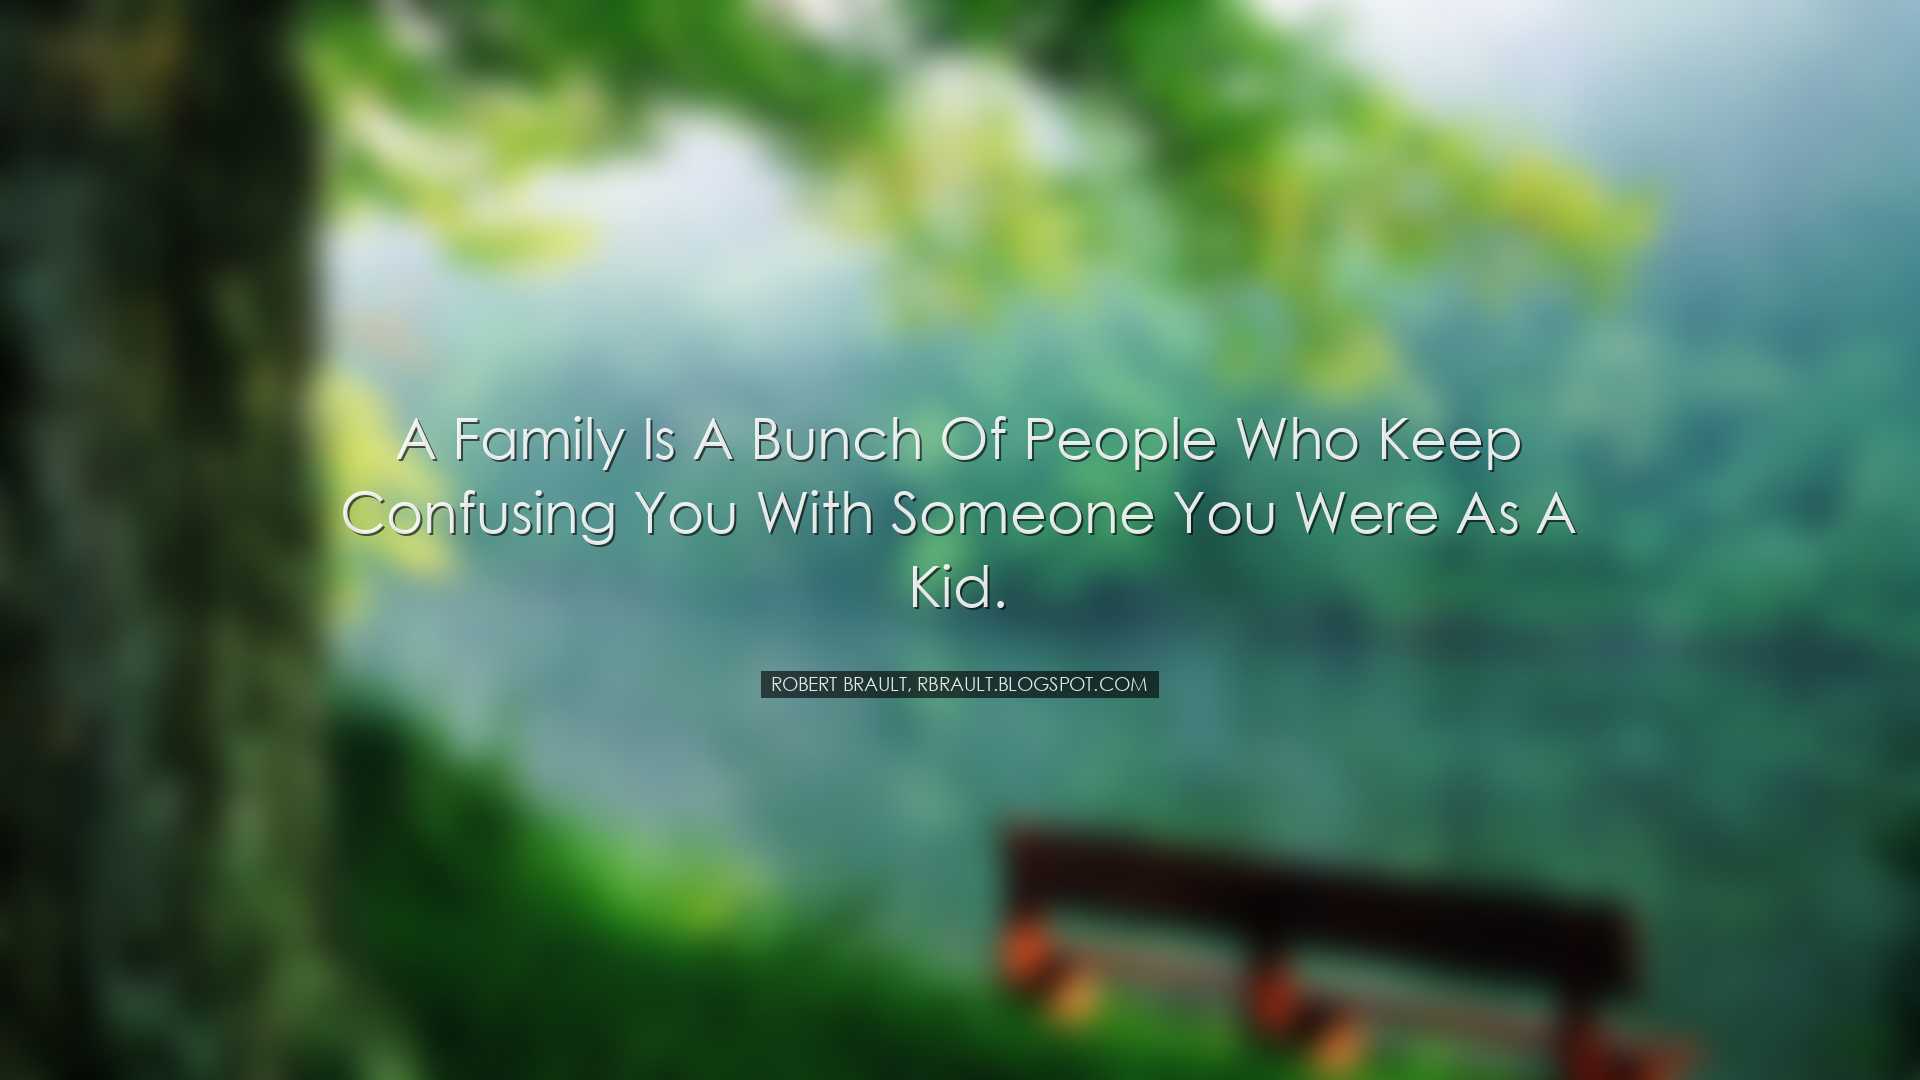 A family is a bunch of people who keep confusing you with someone